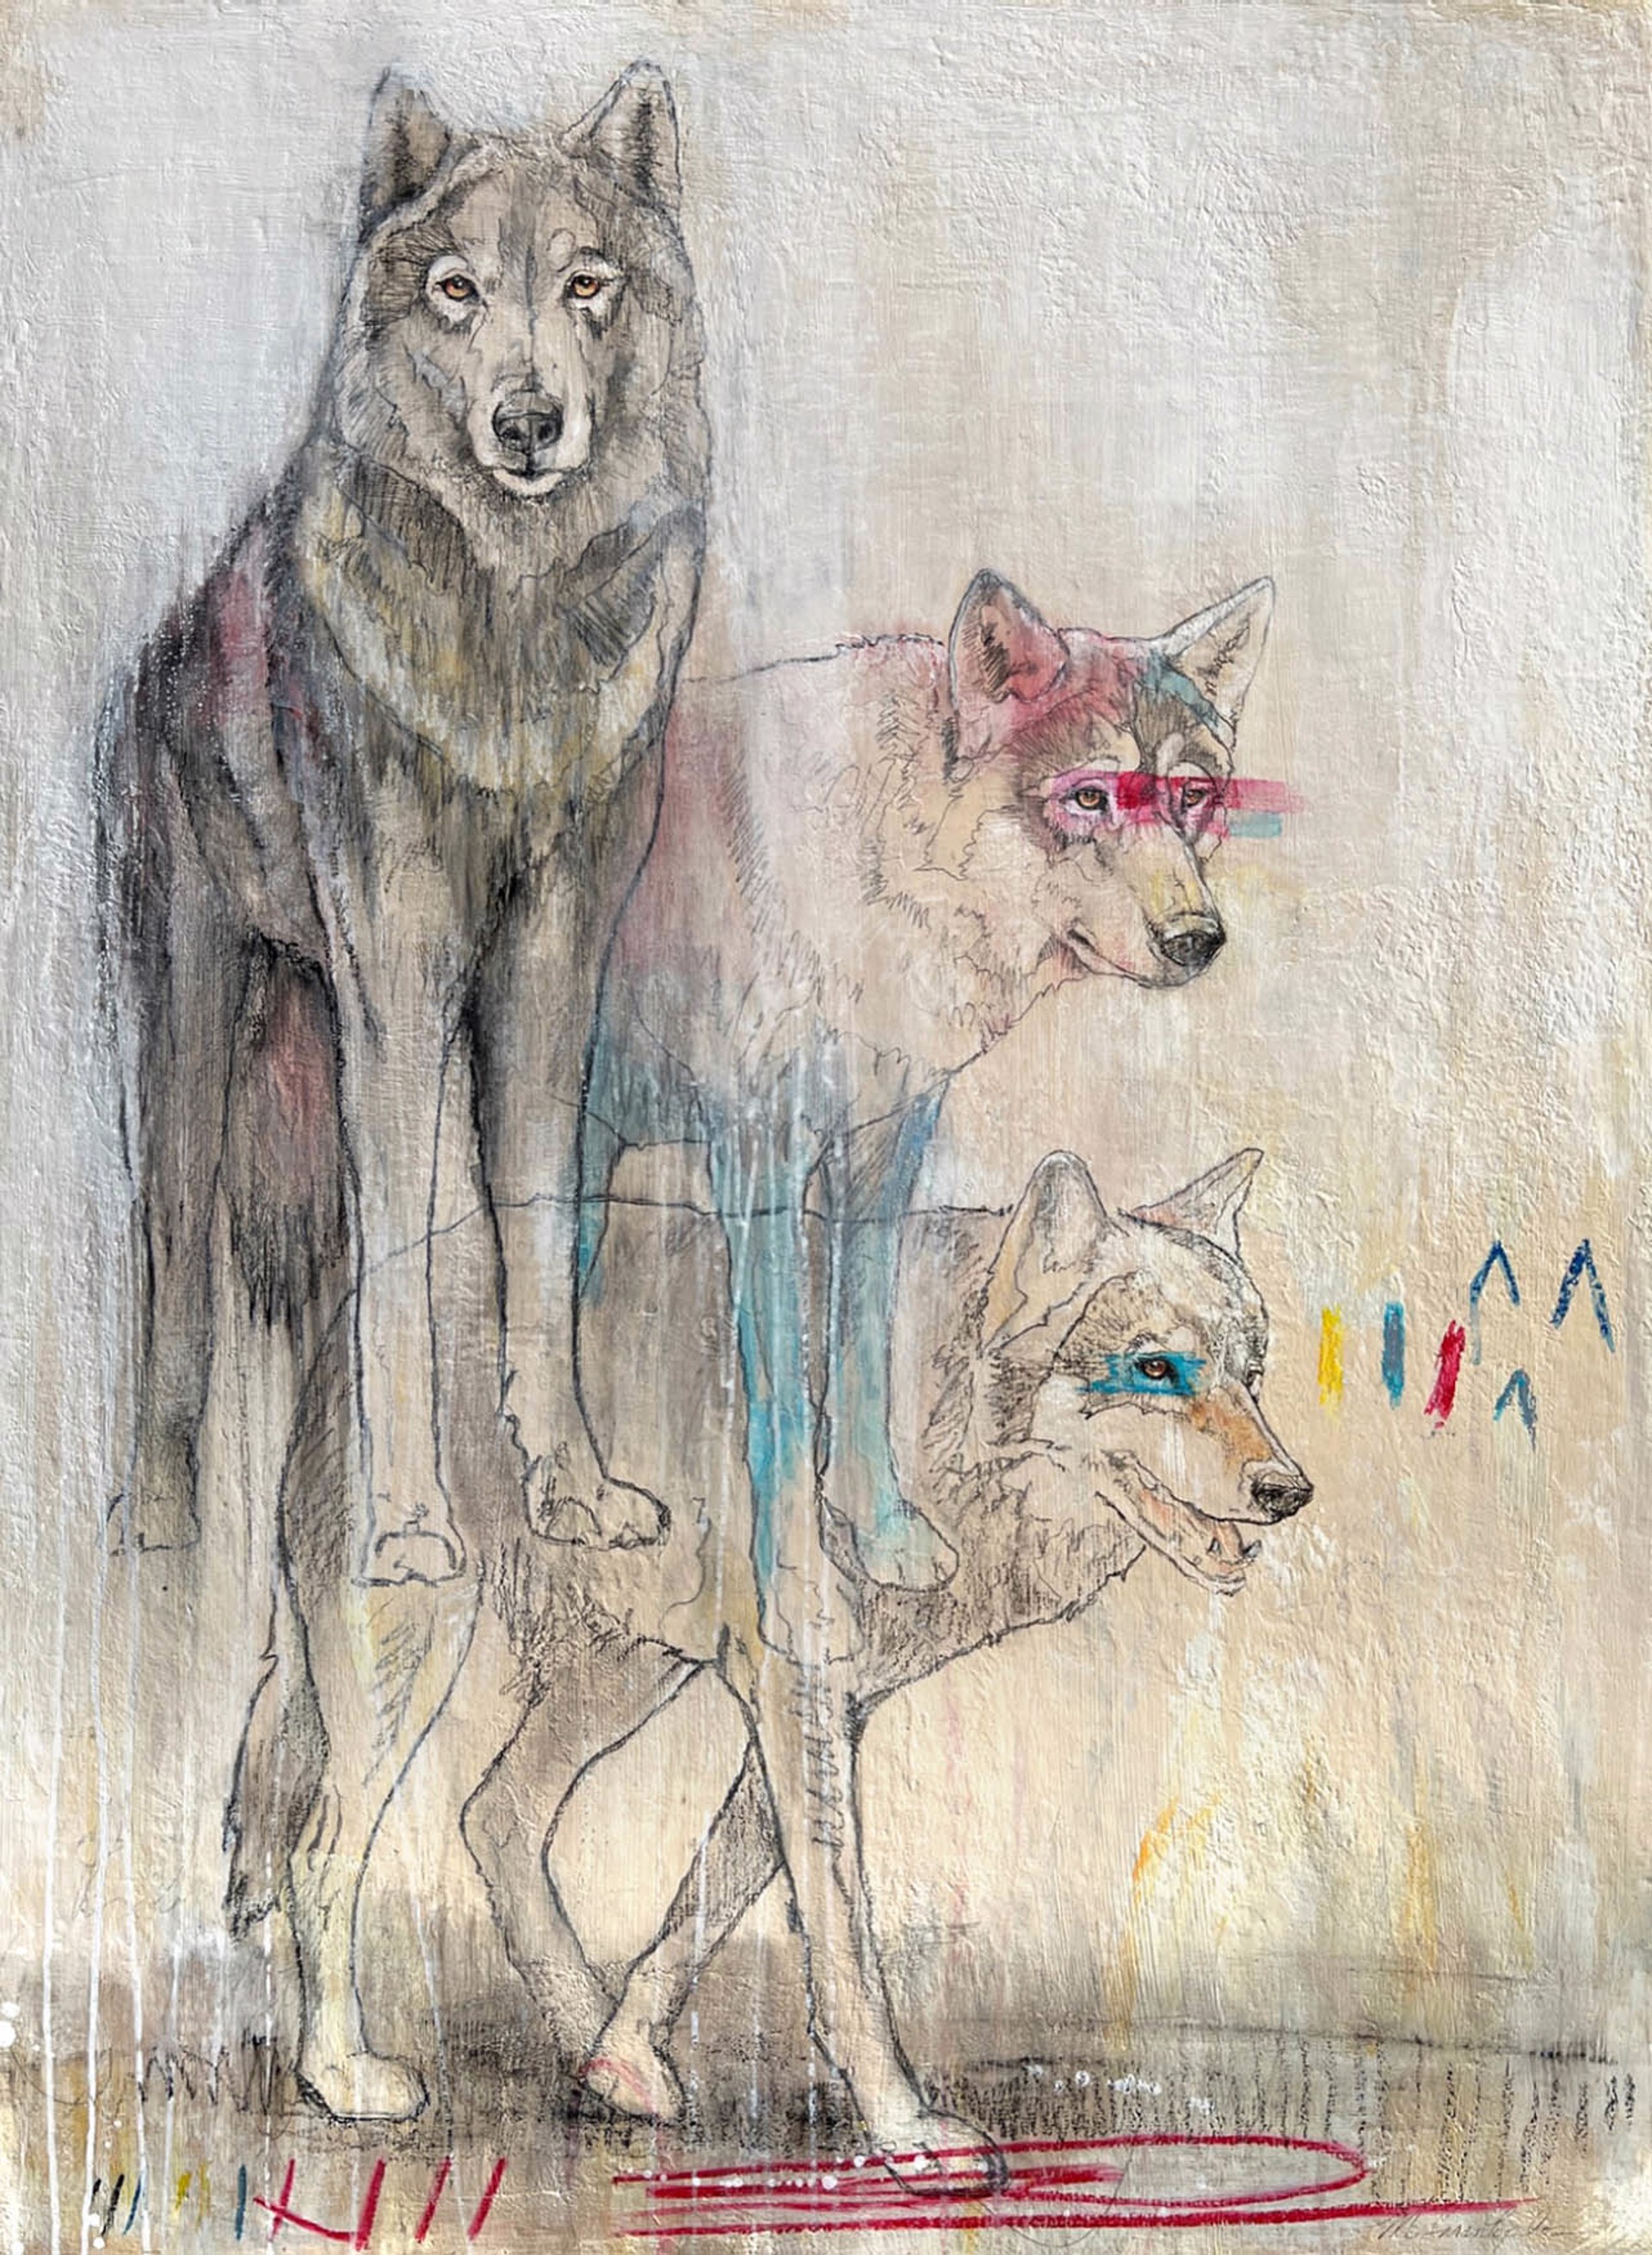 Original Mixed Media Artwork Featuring Three Wolves Sketched Over Abstract Grey Background With Primary Color Linear Details